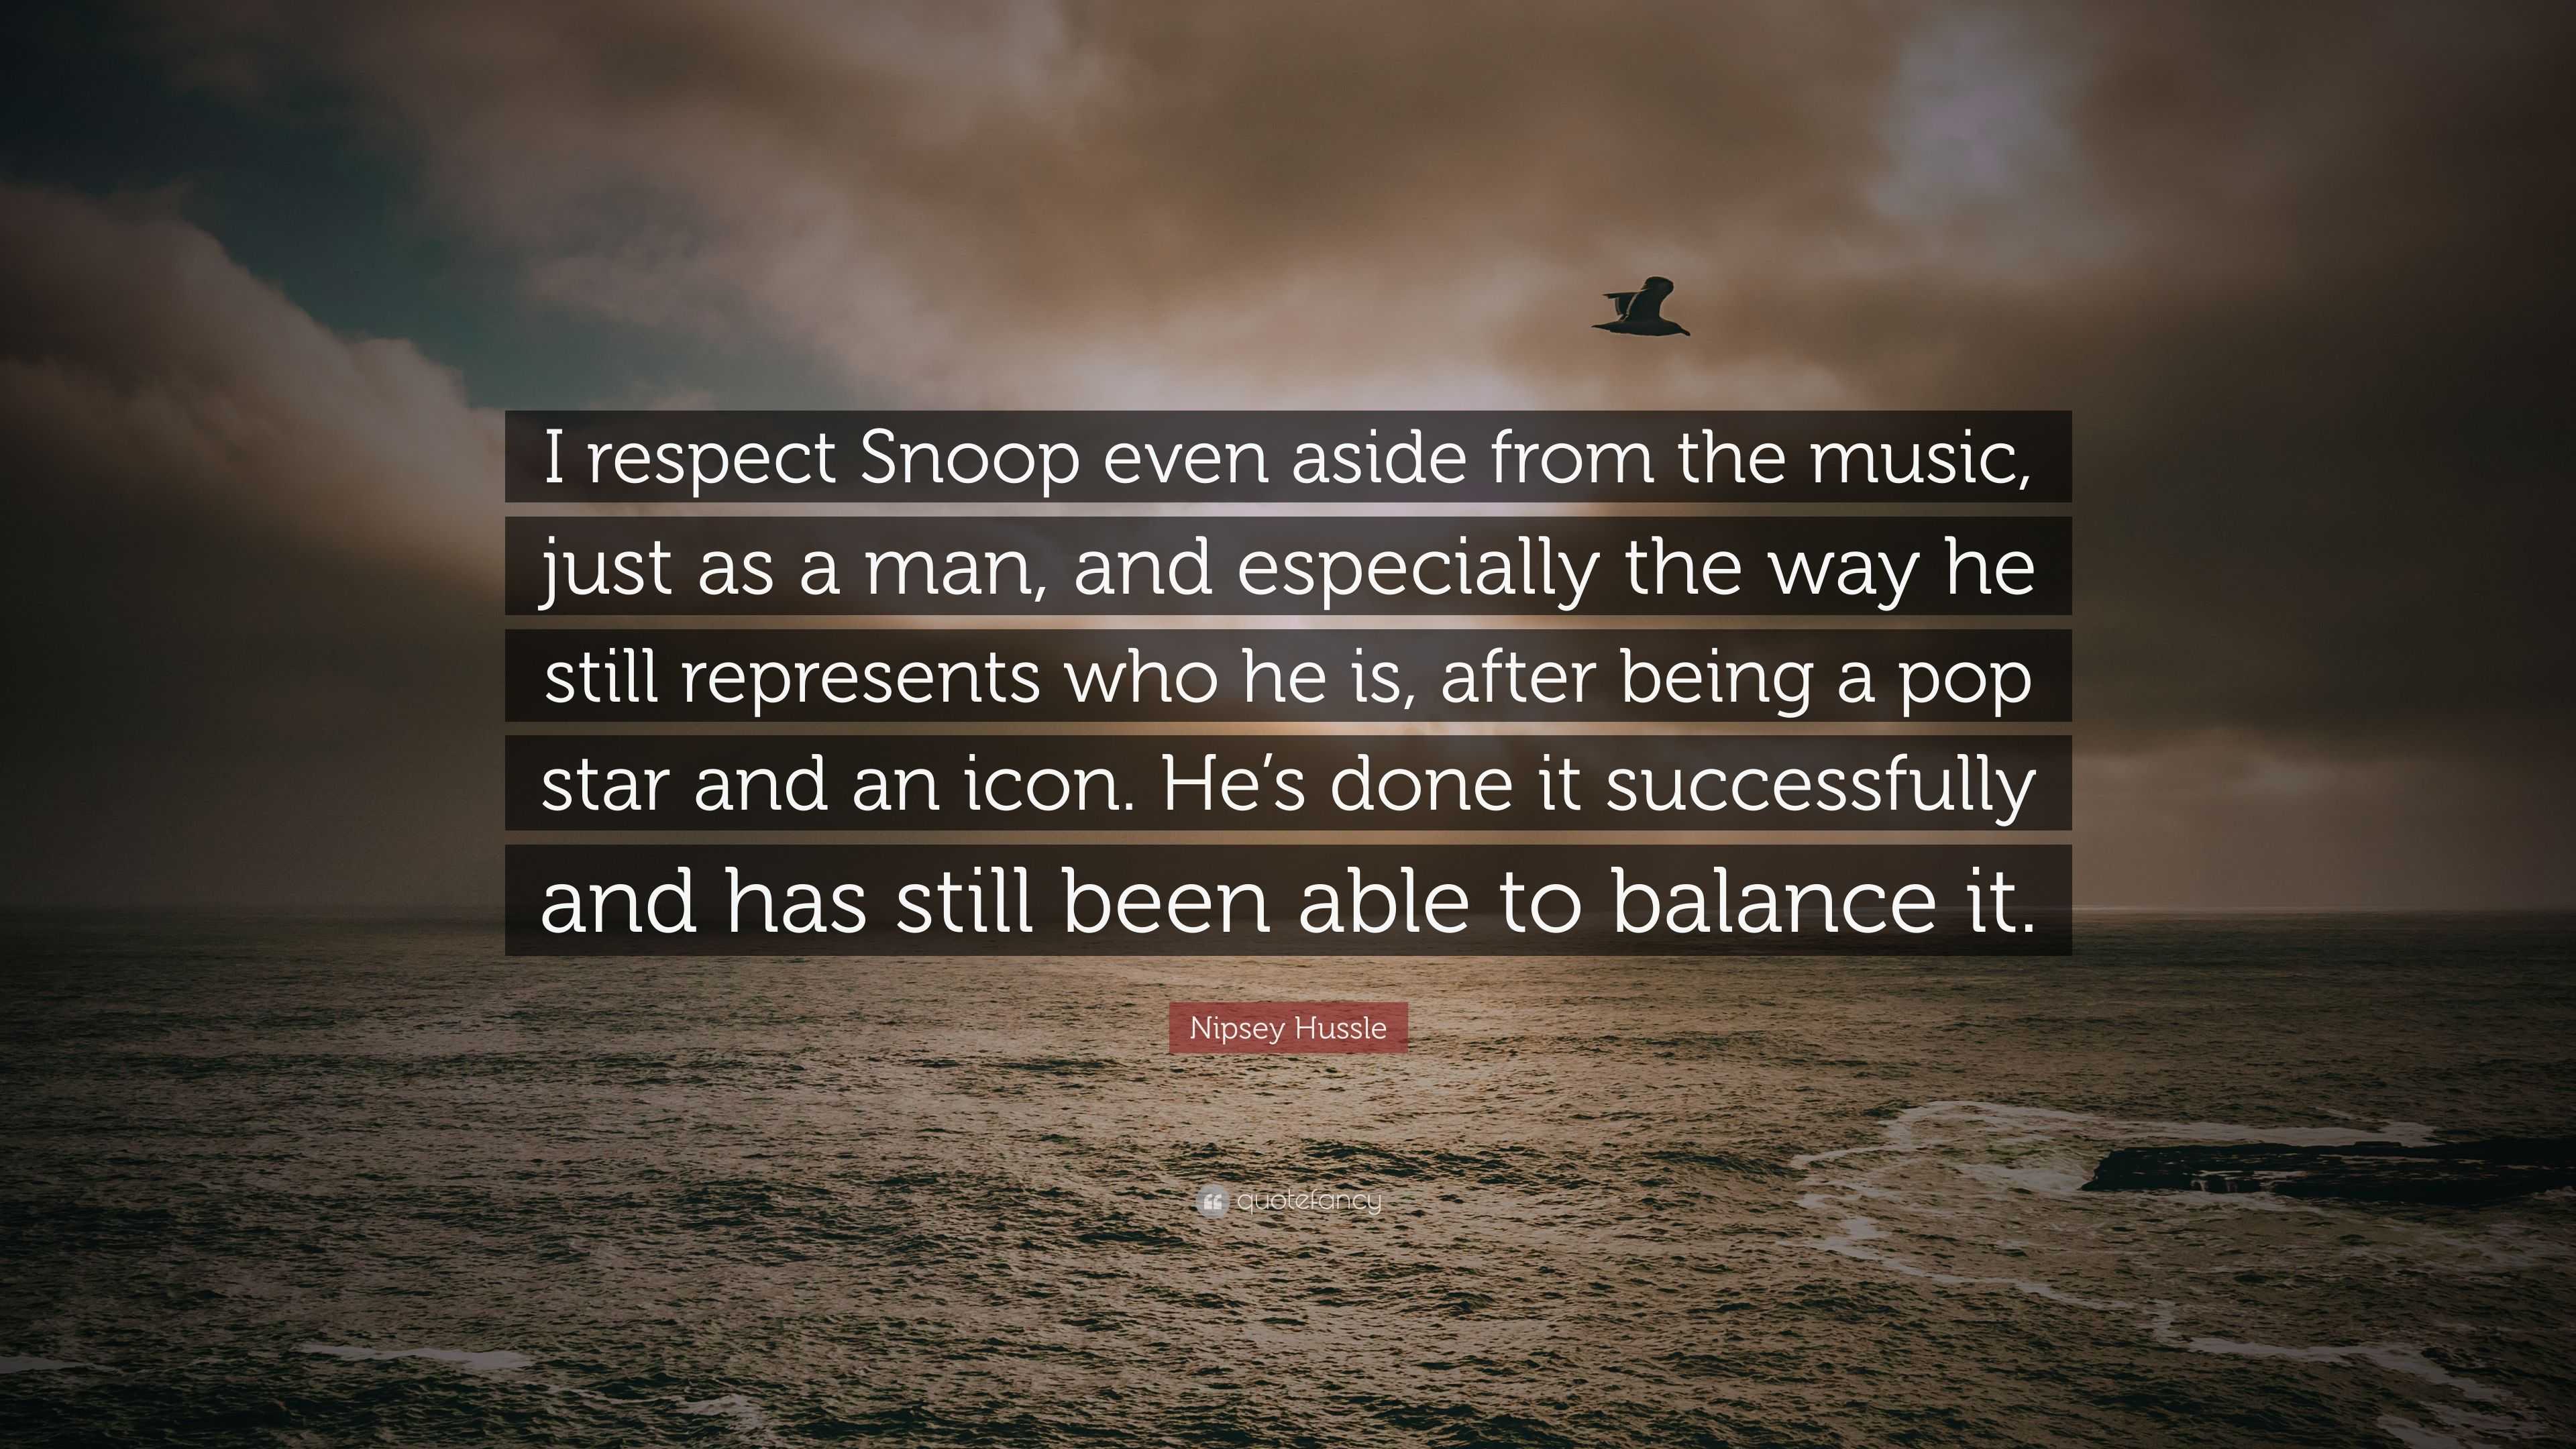 Nipsey Hussle Quote: "I respect Snoop even aside from the ...